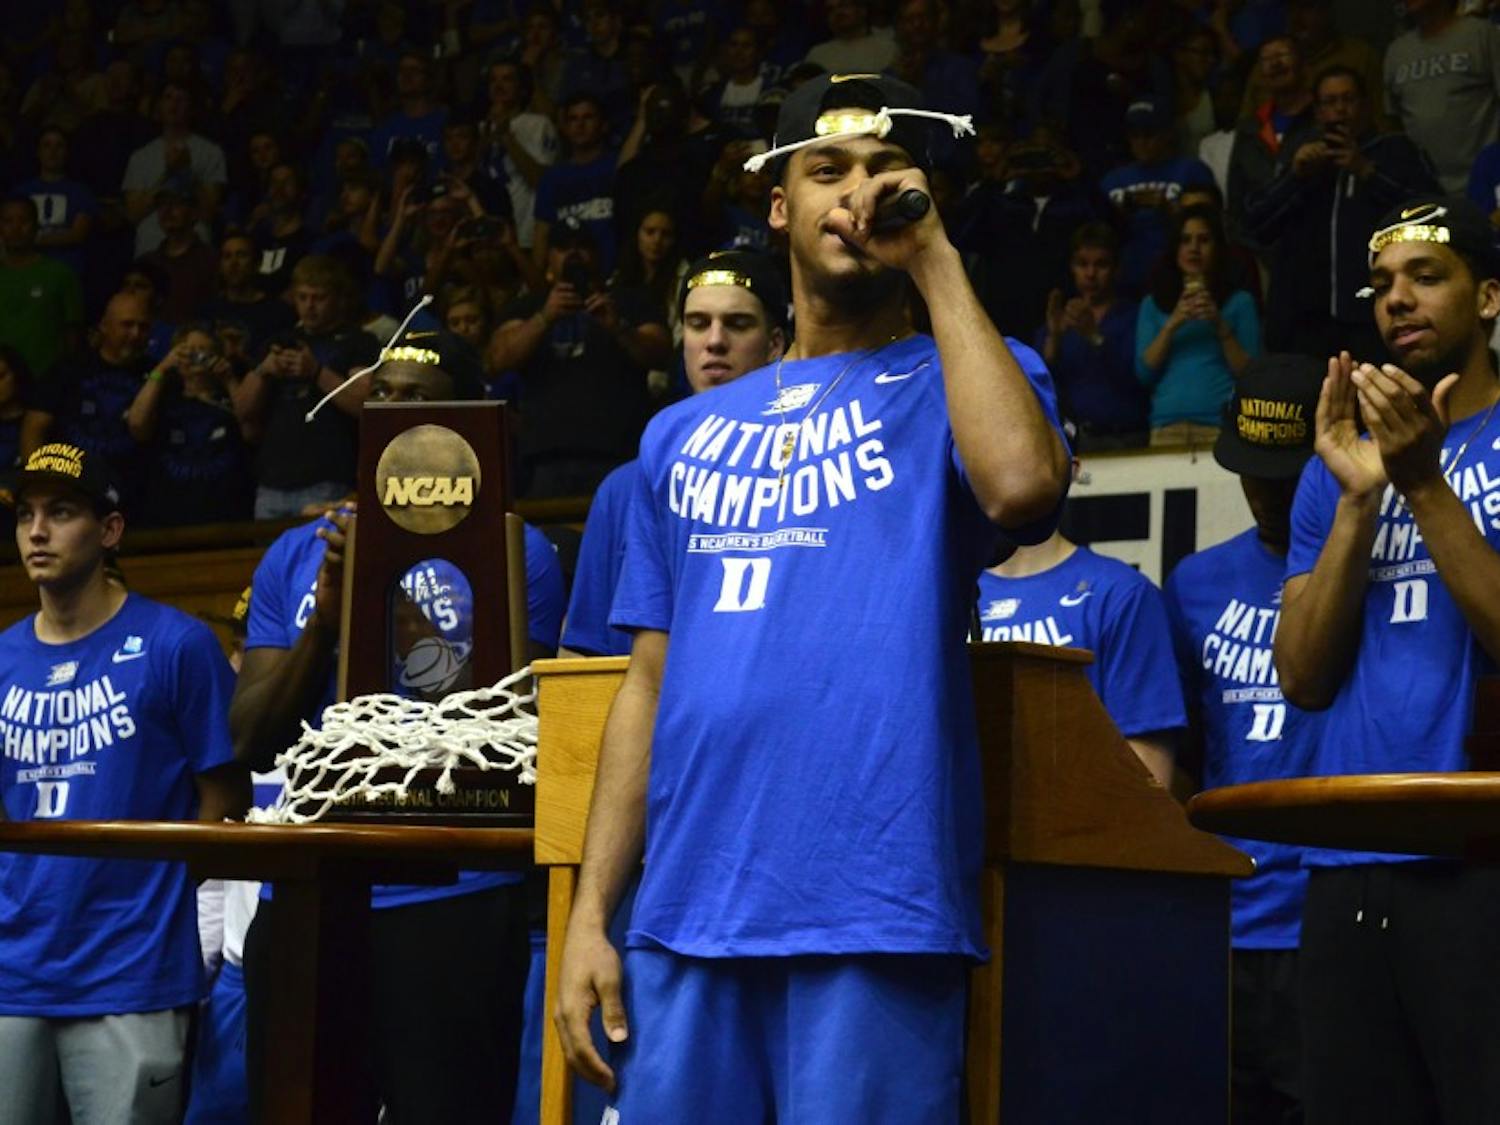 Senior Quinn Cook will get to hang a national title banner in the rafters of Cameron Indoor Stadium after Monday’s win against Wisconsin.